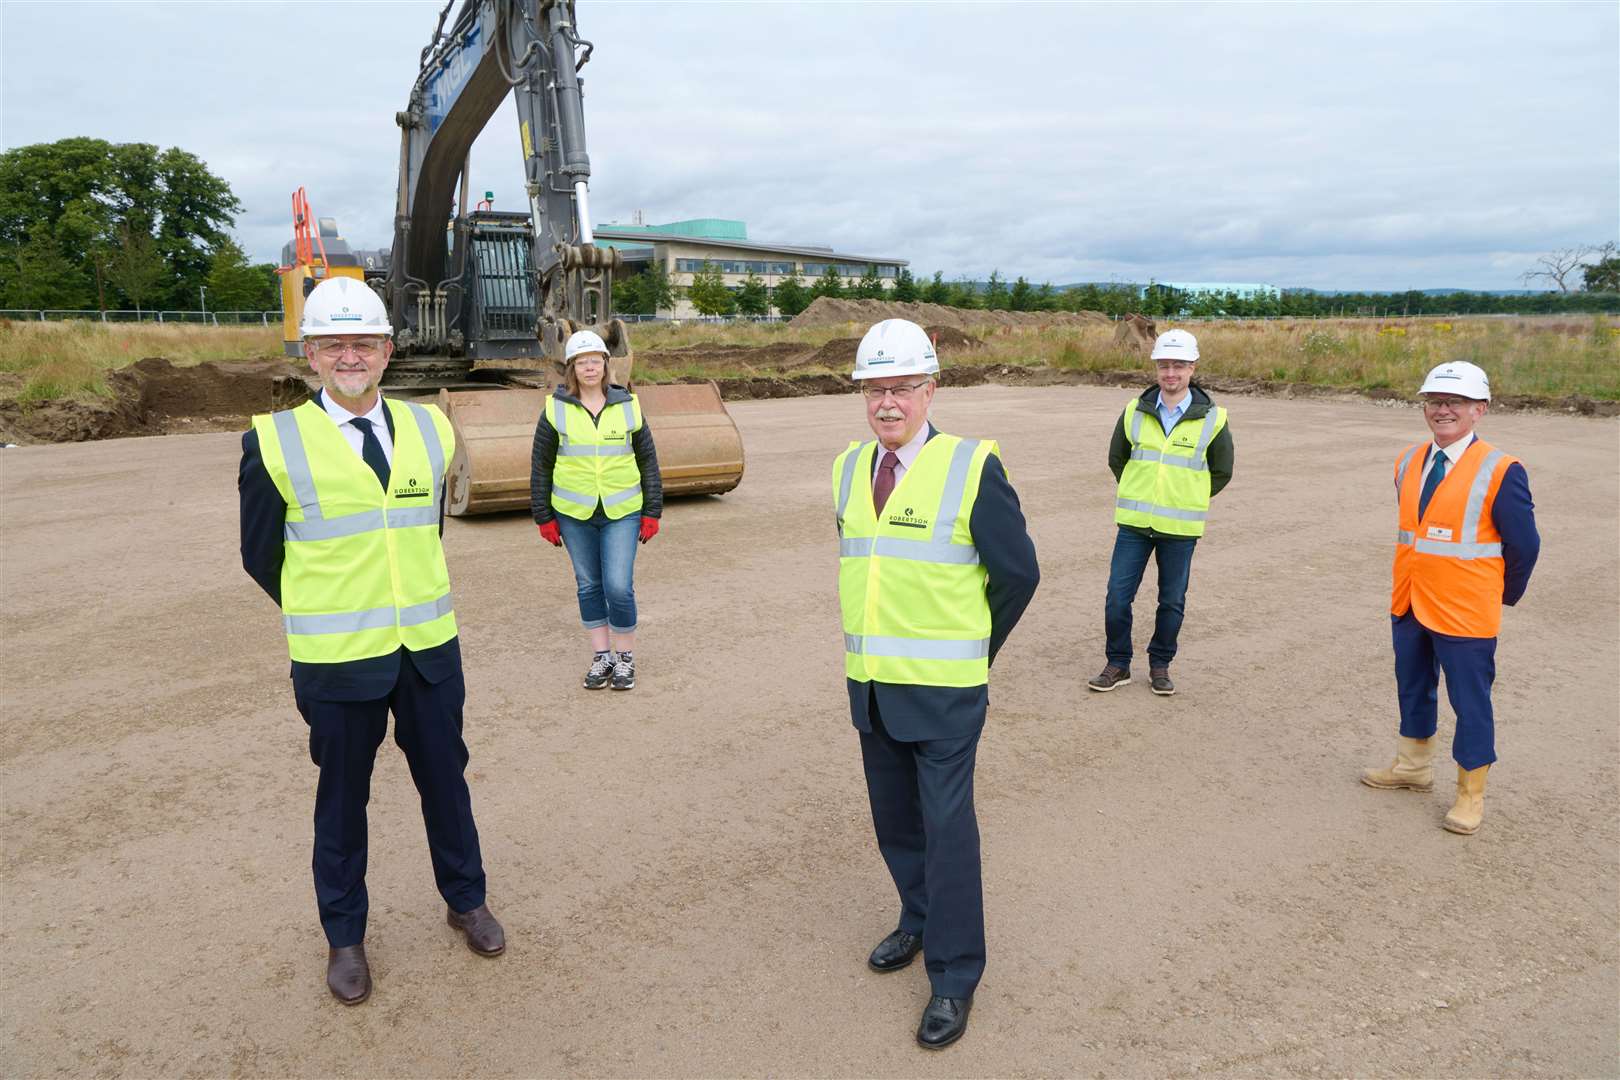 UHI principal and vice-chancellor Professor Todd Walker, life sciences PhD student Ronie Walters, HIE chairman Alistair Dodds CBE, life sciences PhD student Manuel Valdivia, and Frank Reid, regional managing director, Robertson Construction Northern, gather for the turf cutting ceremony at Inverness Campus.